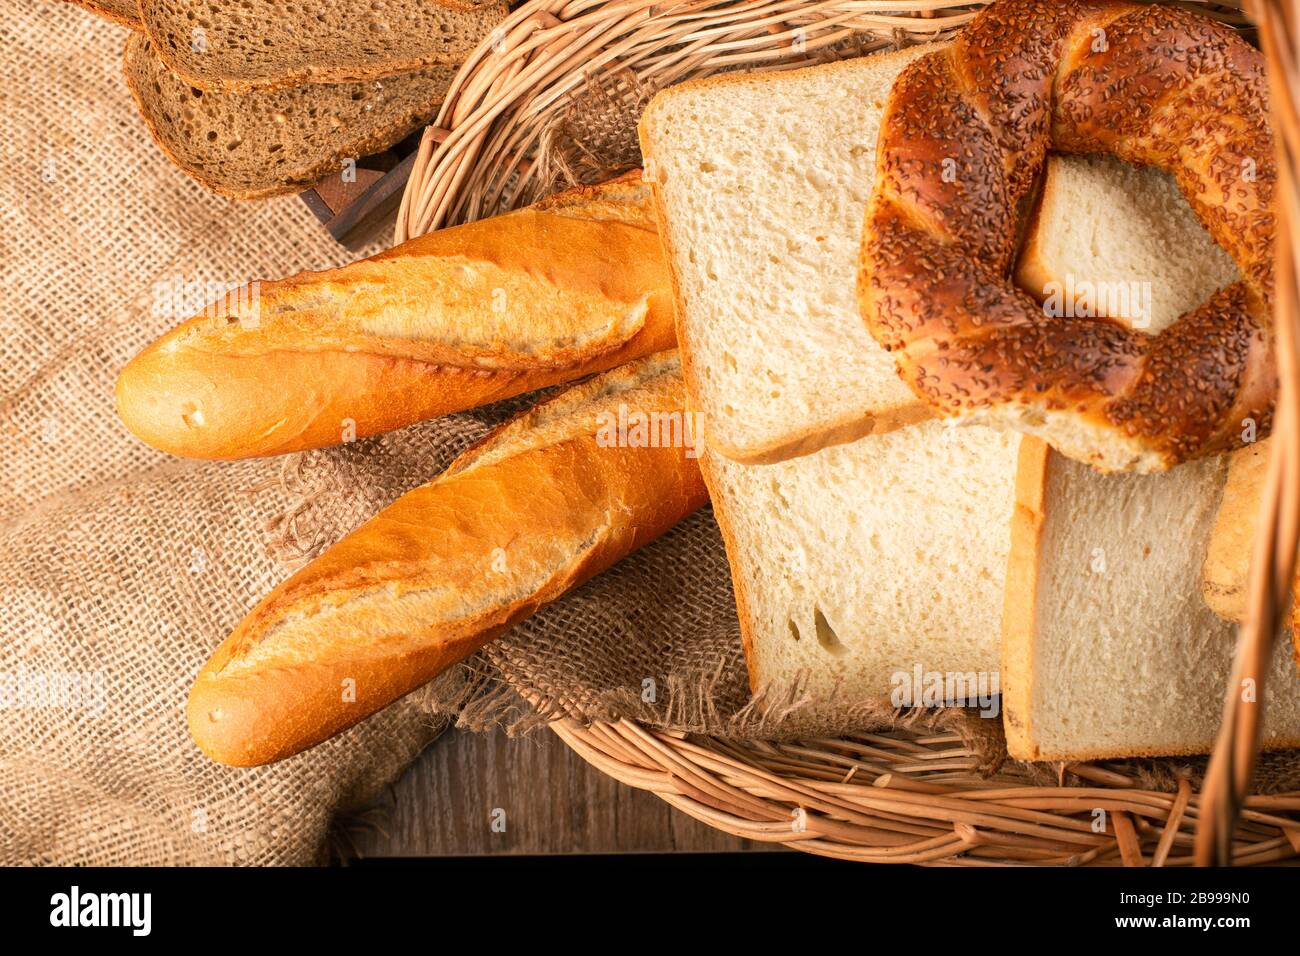 French baguette with slices of bread and bagels in basket Stock Photo